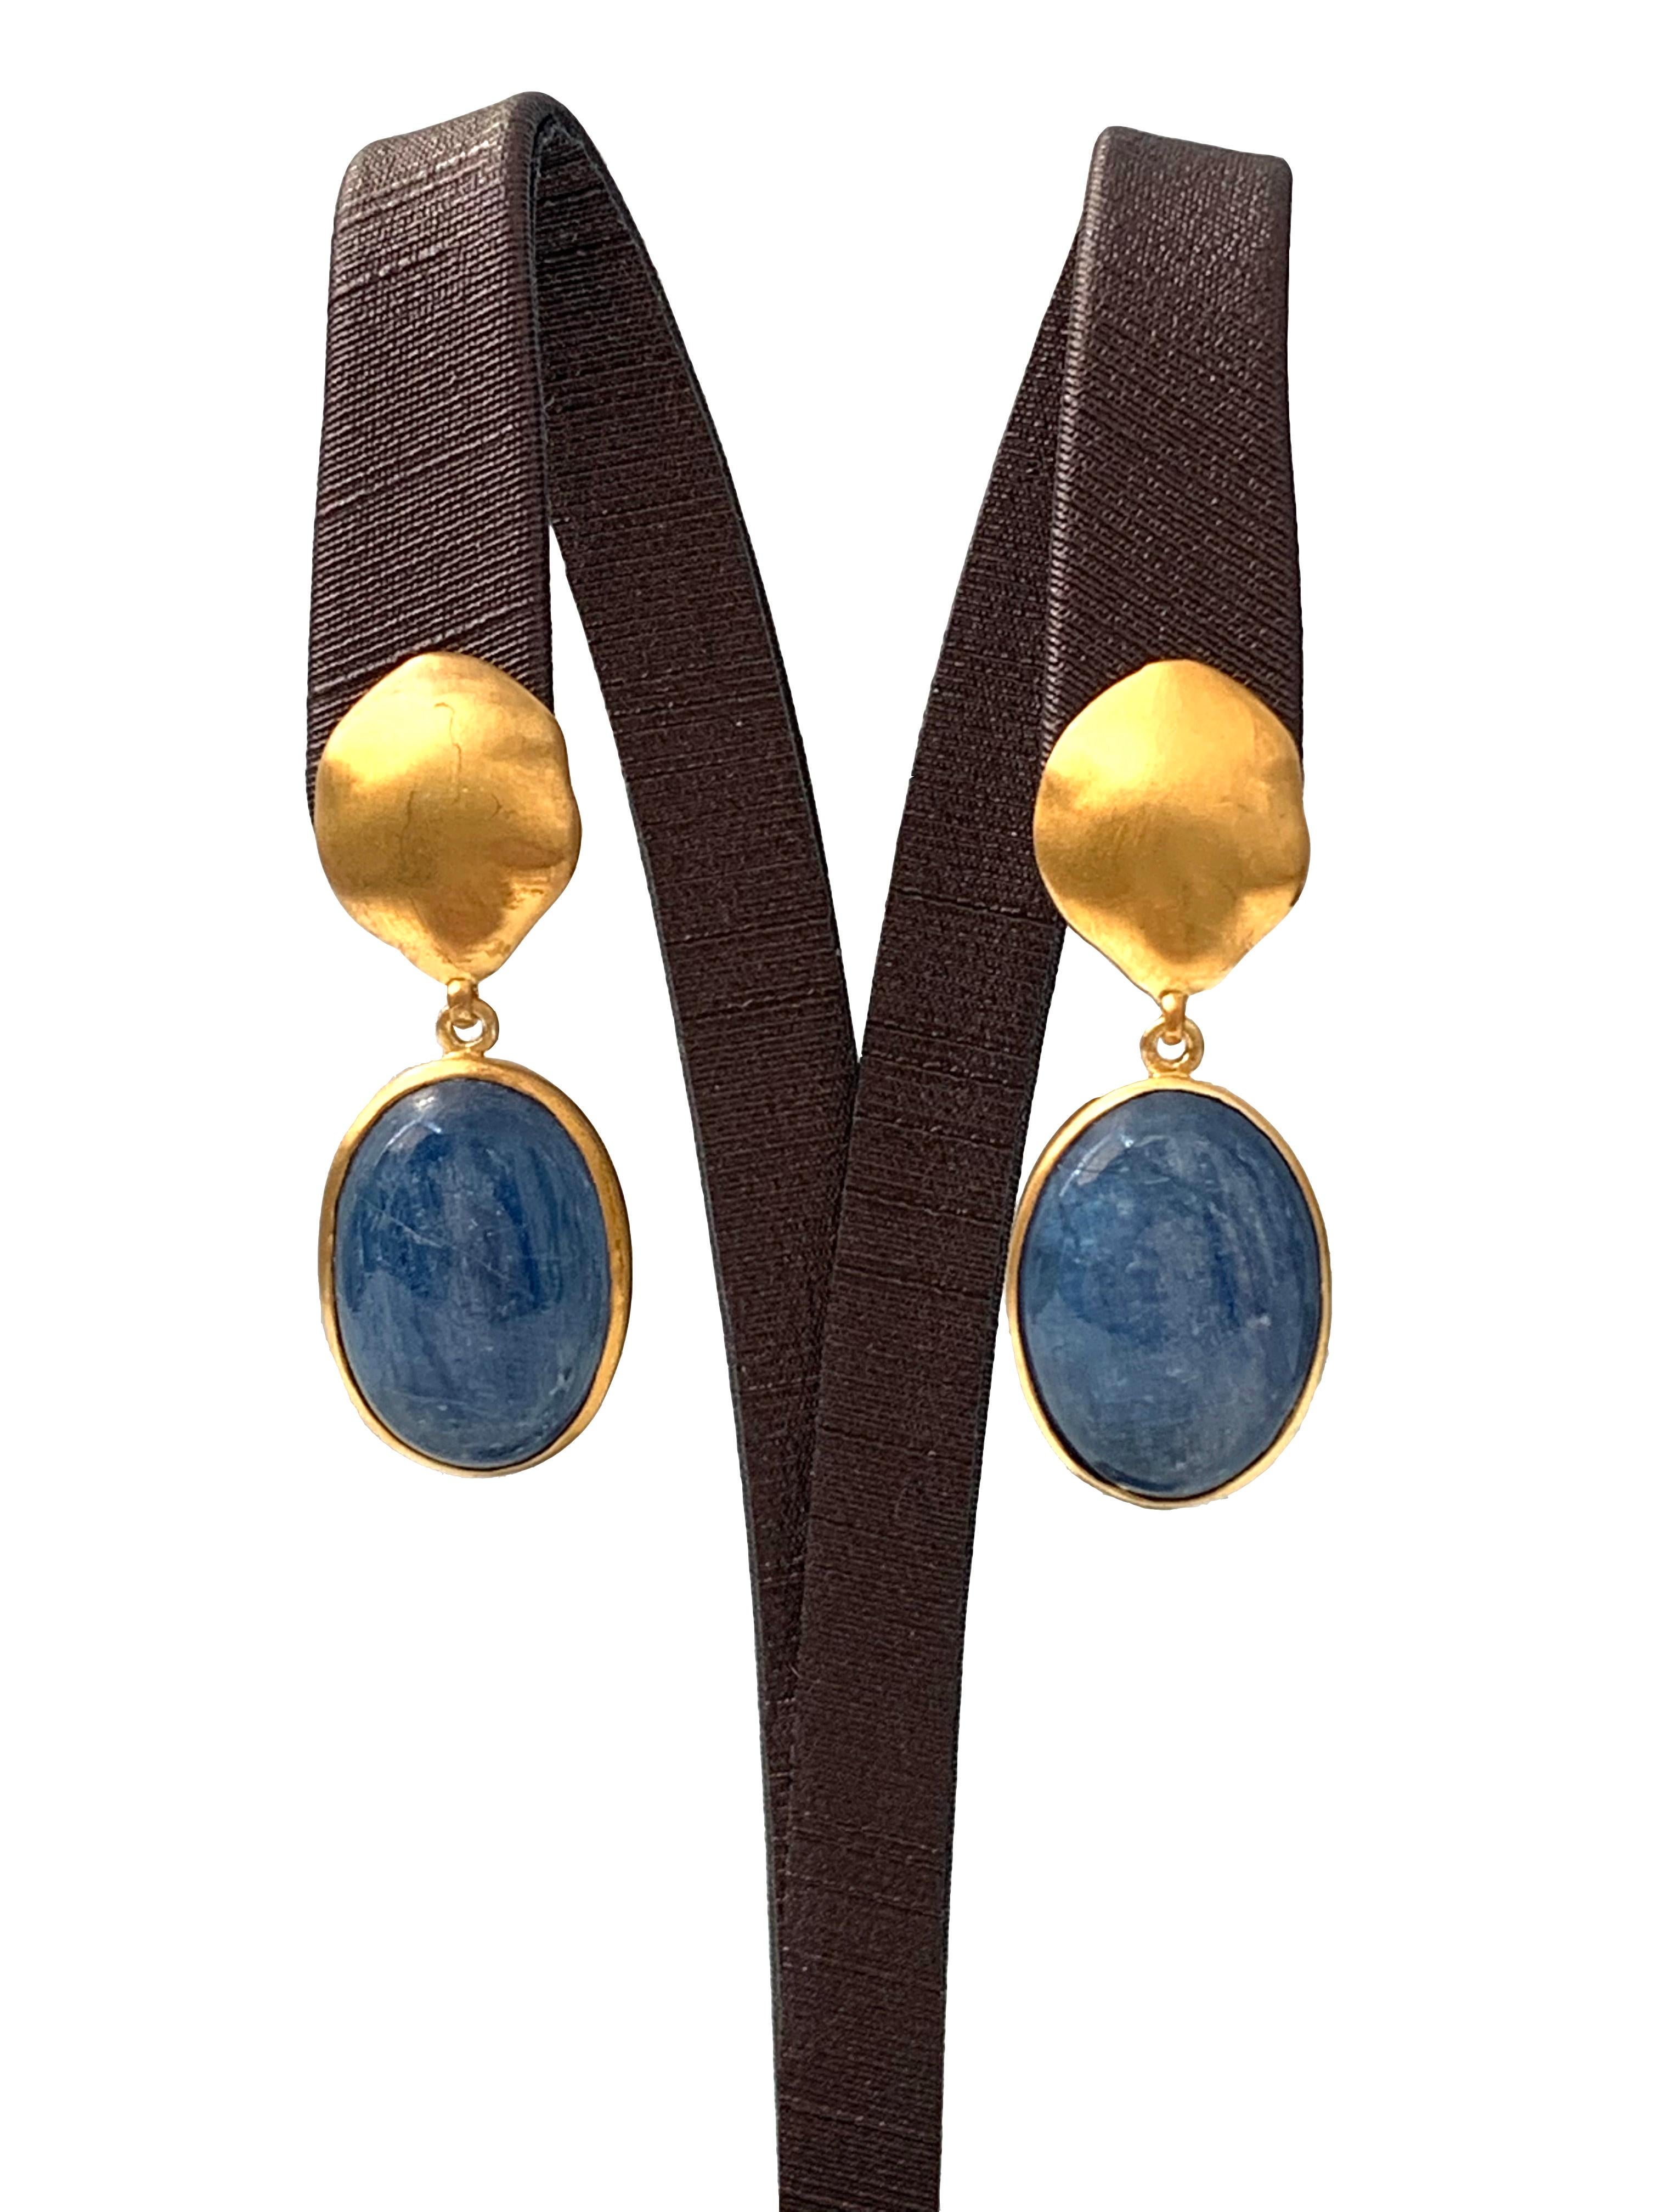 Discover oval Kyanite Vermeil Drop Earrings. The earrings feature 2 large oval cabochon-cut Kyanite with unique and beautiful iridescent blue hue, handcrafted brushed satin texturing technique, and hand set in vermeil 18k gold plated sterling